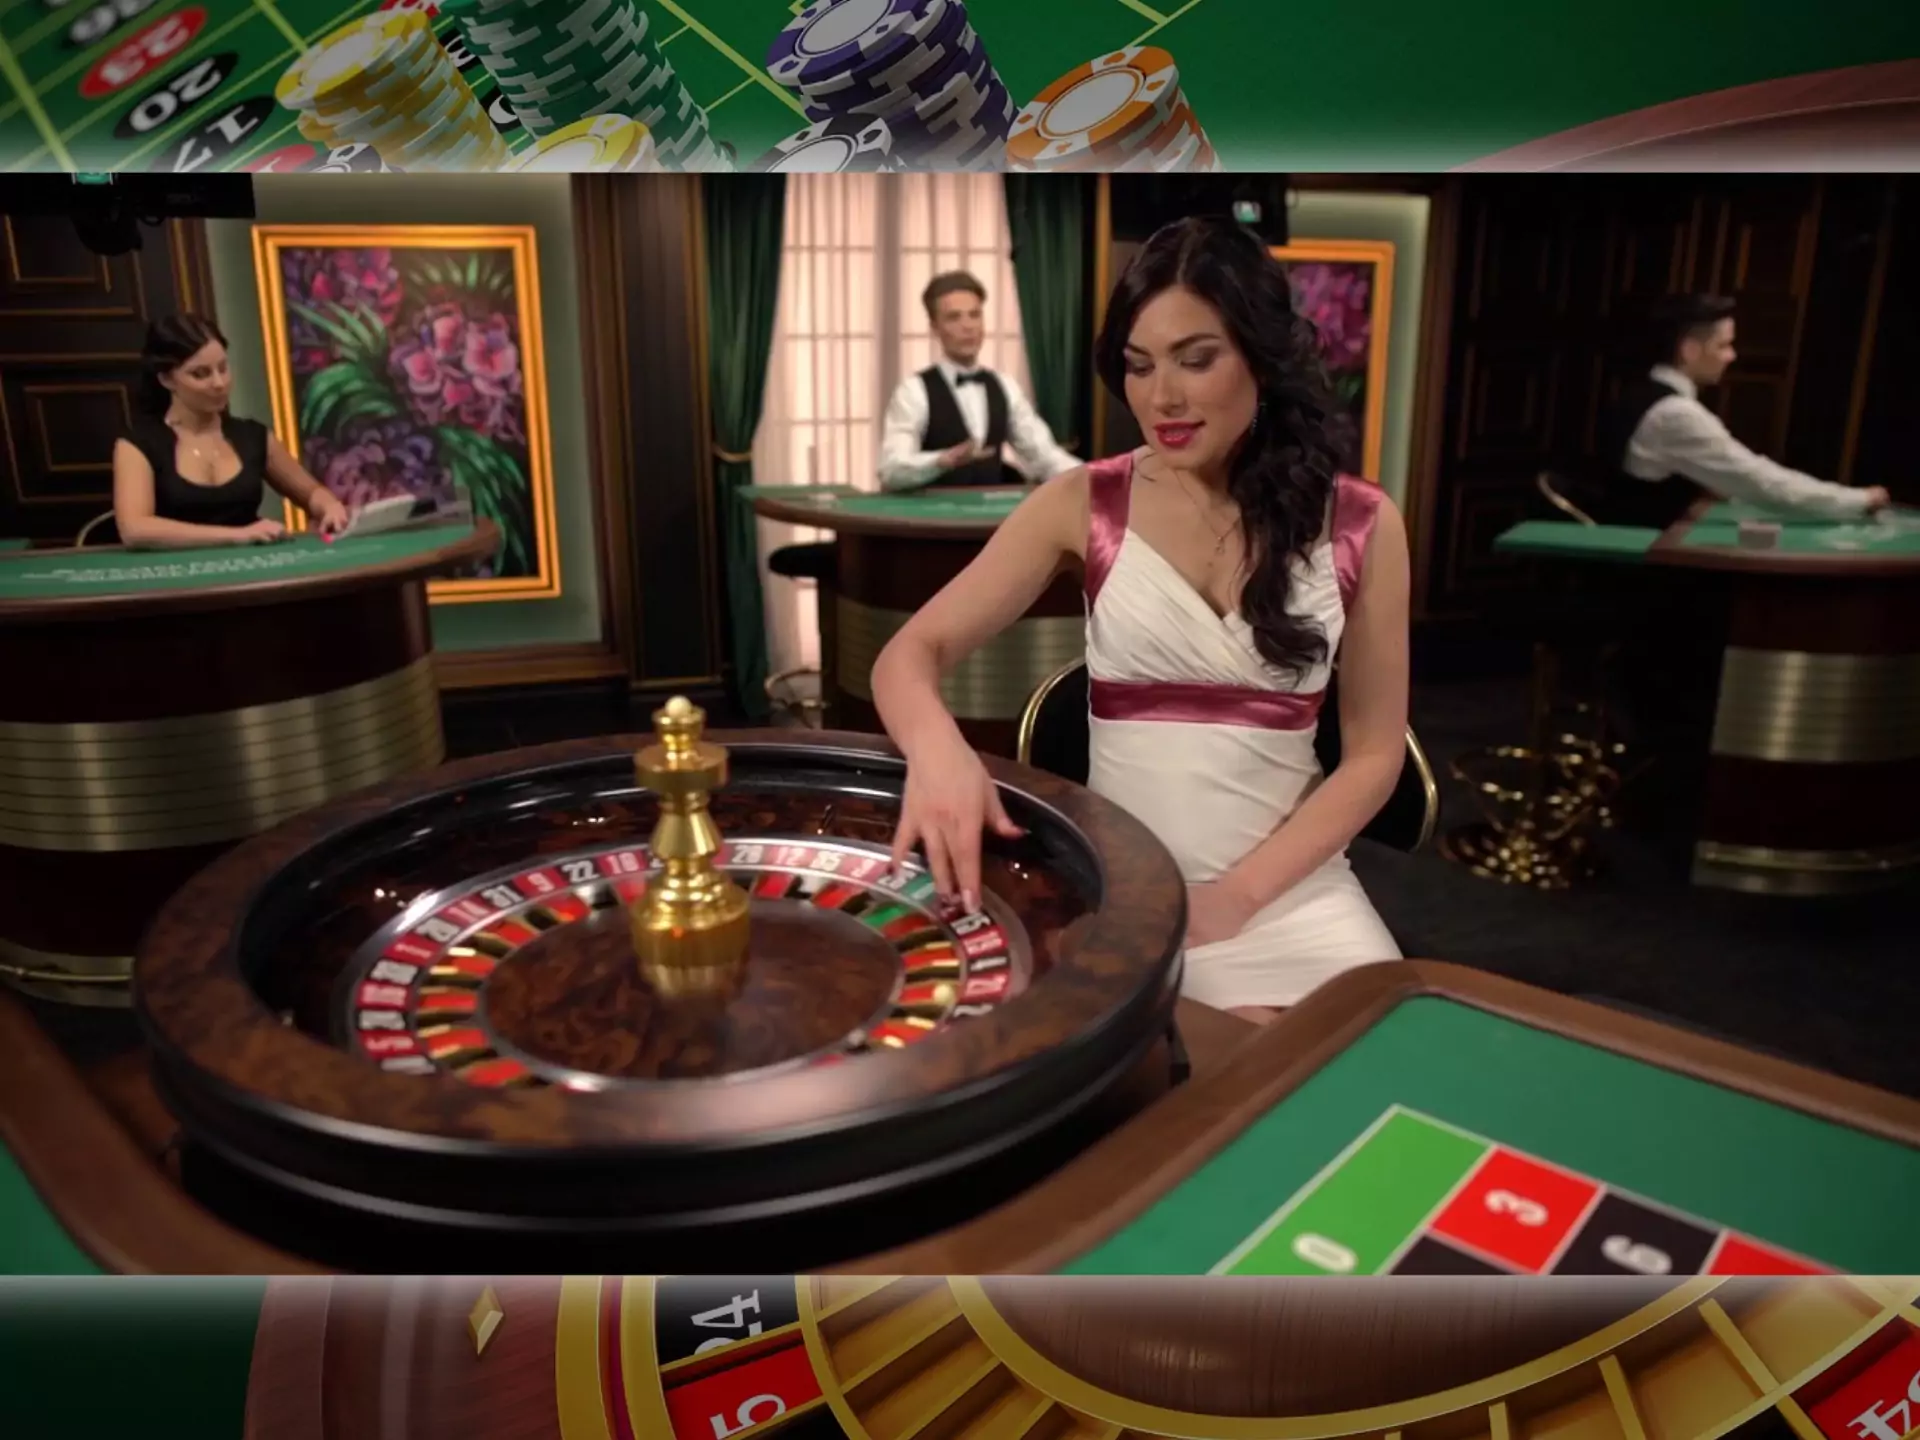 Play this kind of roulette from Evolution Gaming at an online casino in India.